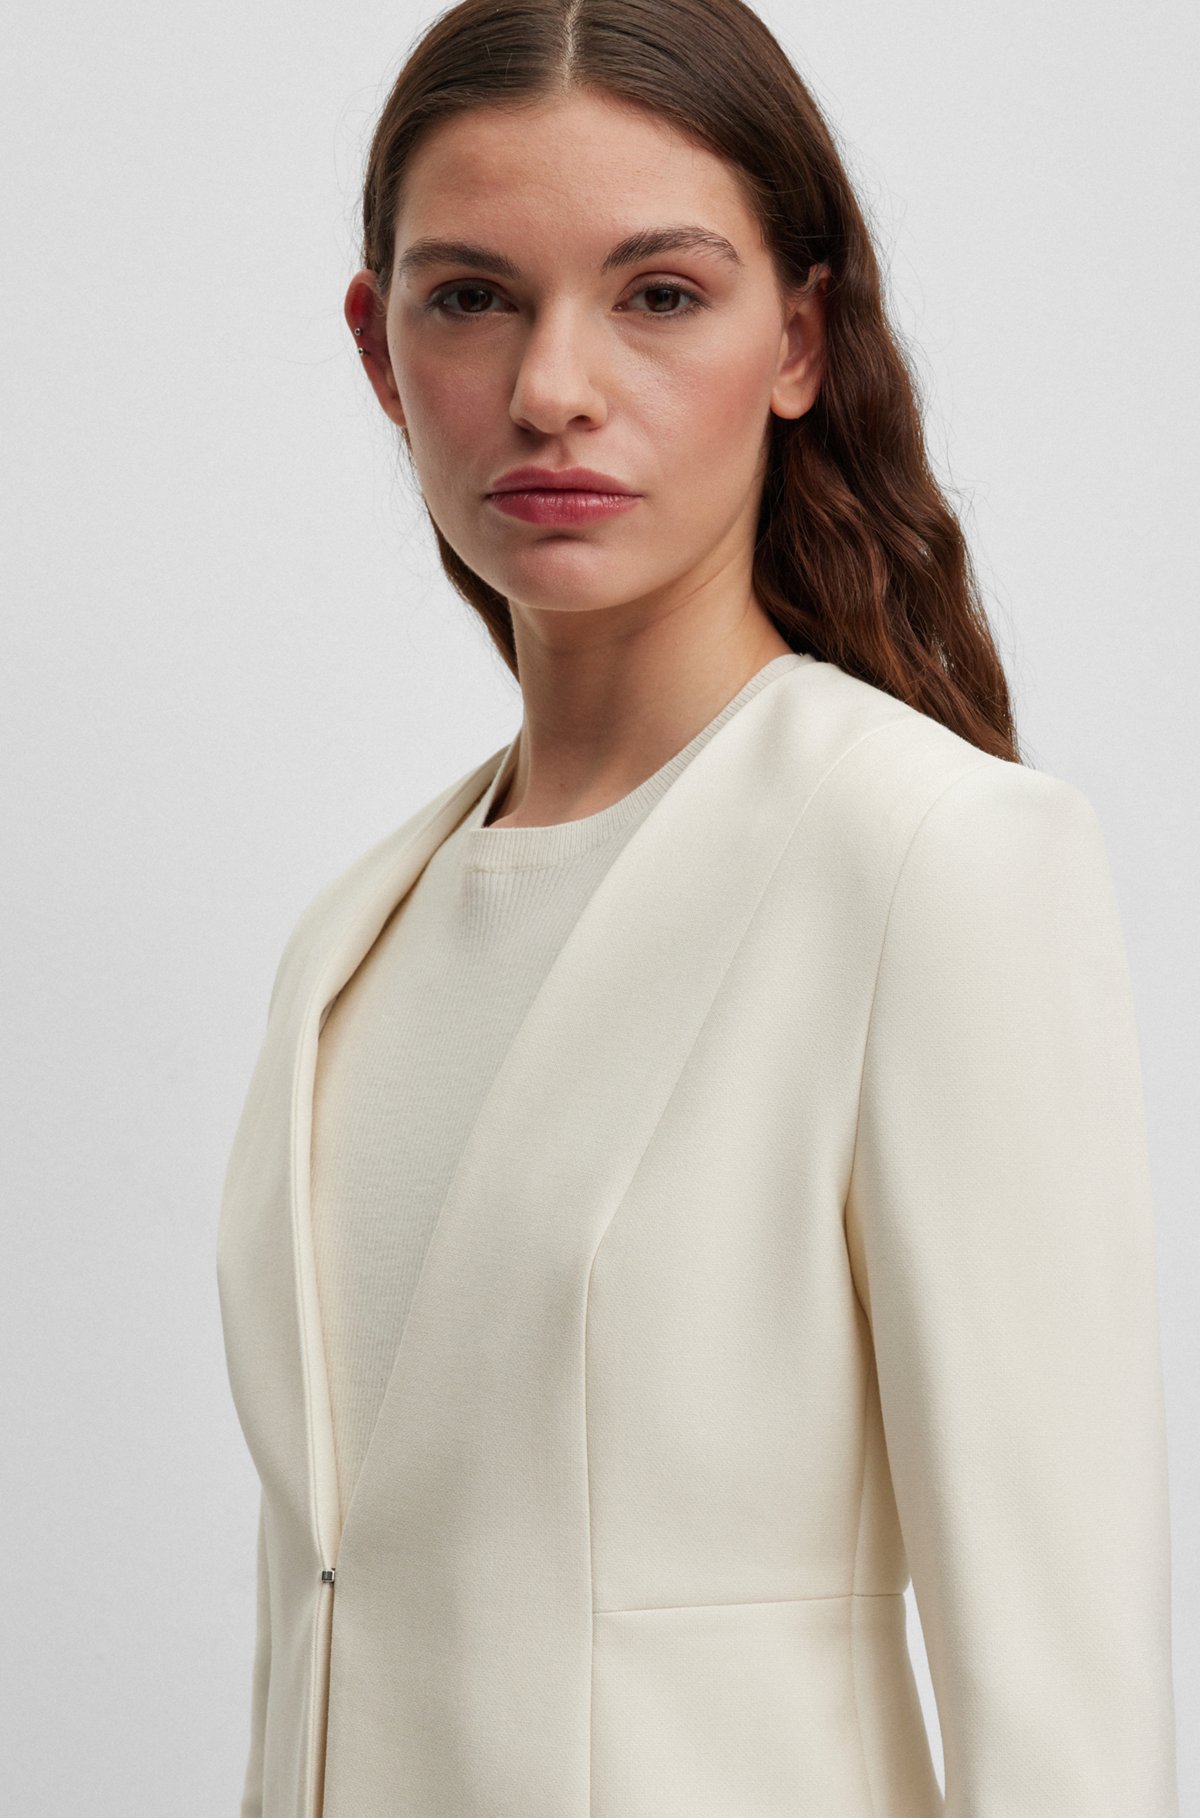 Slim-fit cropped jacket with collarless styling, White